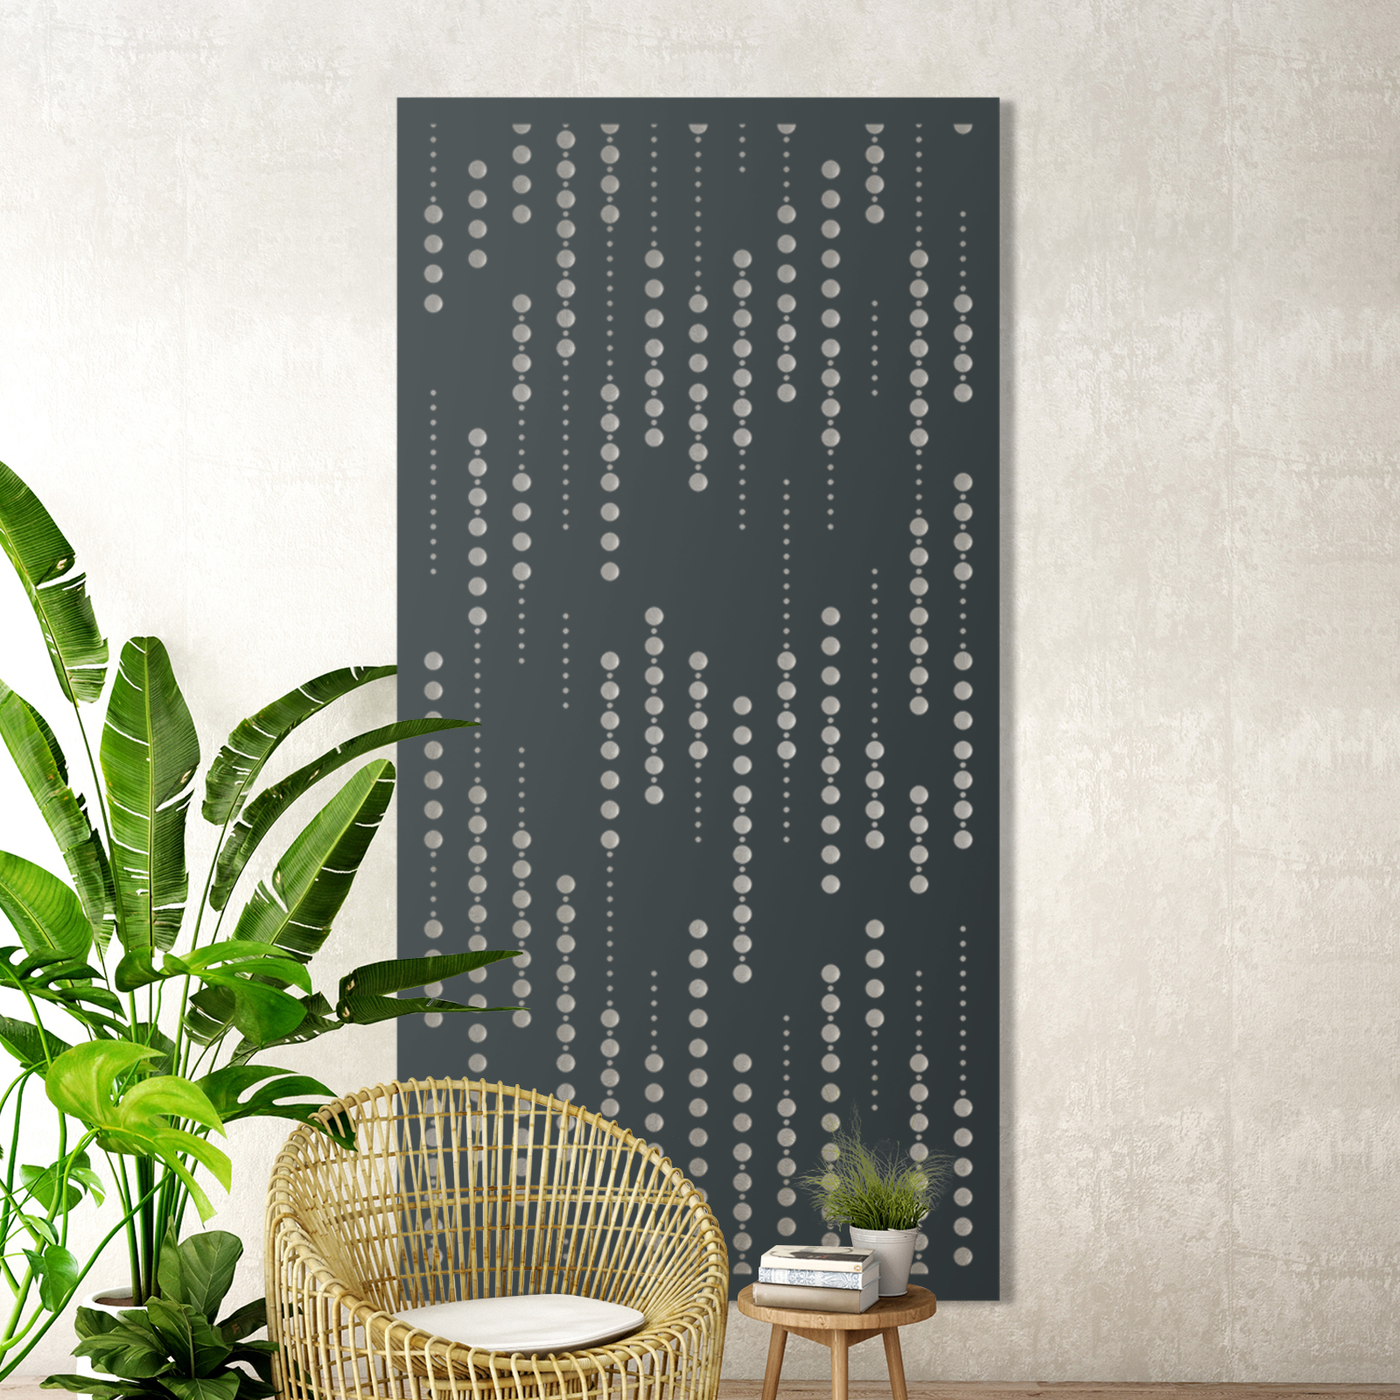 Beads Metal Garden Screen: Adding Privacy to Your Garden in Style